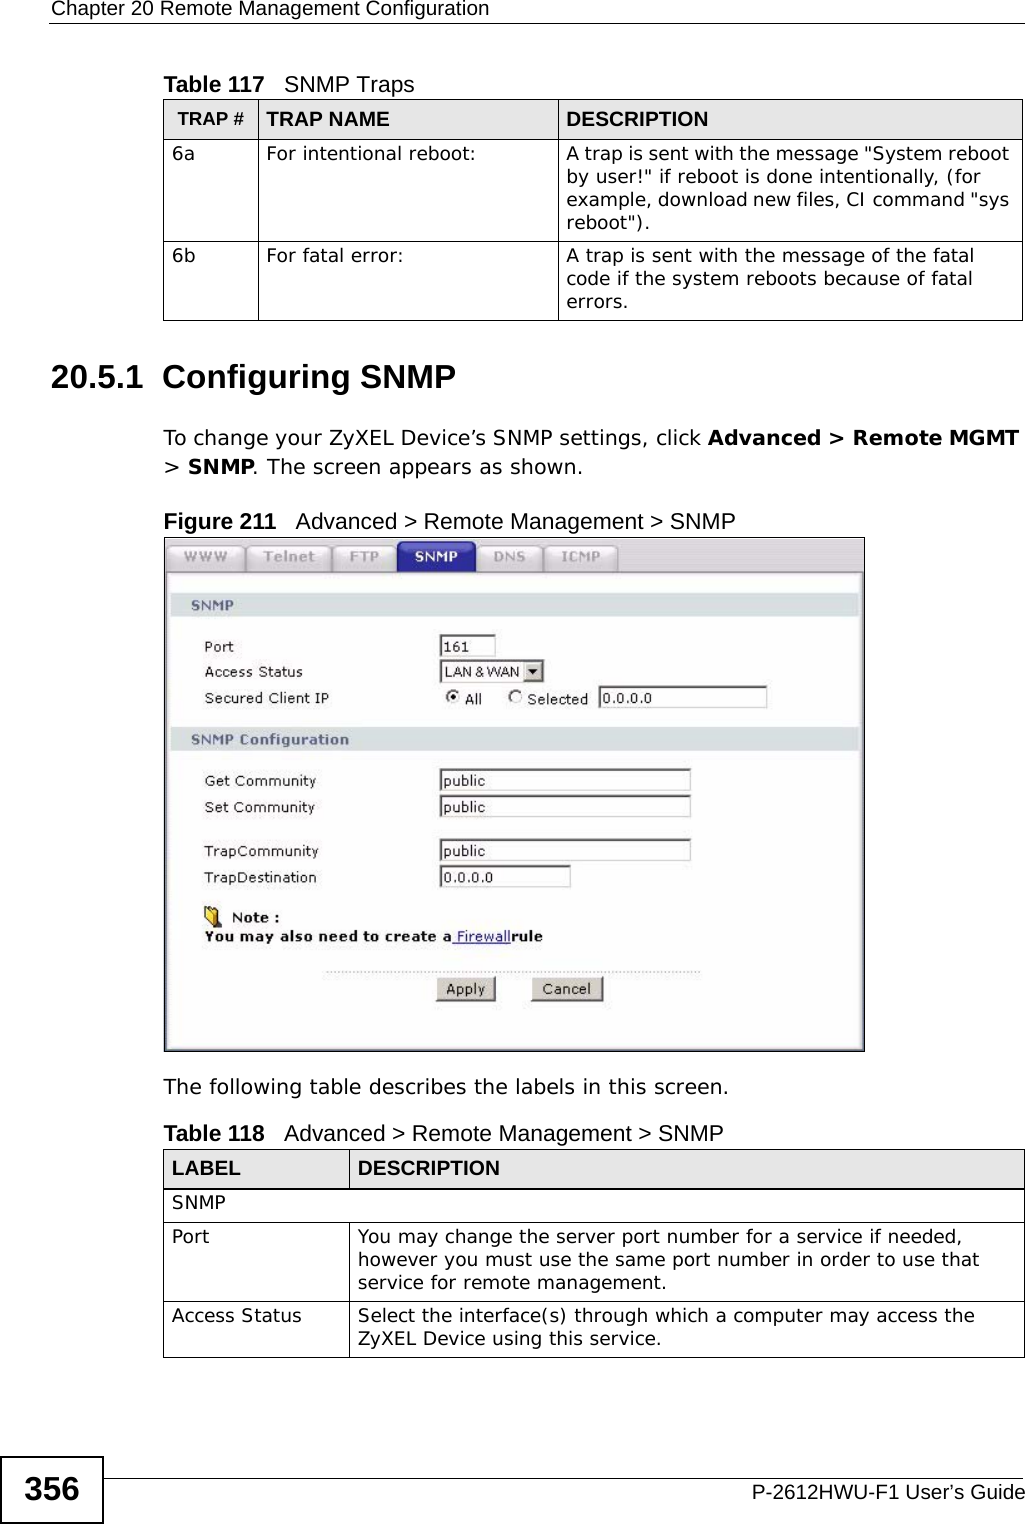 Chapter 20 Remote Management ConfigurationP-2612HWU-F1 User’s Guide35620.5.1  Configuring SNMPTo change your ZyXEL Device’s SNMP settings, click Advanced &gt; Remote MGMT &gt; SNMP. The screen appears as shown.Figure 211   Advanced &gt; Remote Management &gt; SNMPThe following table describes the labels in this screen. 6a For intentional reboot: A trap is sent with the message &quot;System reboot by user!&quot; if reboot is done intentionally, (for example, download new files, CI command &quot;sys reboot&quot;).6b For fatal error:  A trap is sent with the message of the fatal code if the system reboots because of fatal errors.Table 117   SNMP TrapsTRAP # TRAP NAME DESCRIPTIONTable 118   Advanced &gt; Remote Management &gt; SNMPLABEL DESCRIPTIONSNMPPort You may change the server port number for a service if needed, however you must use the same port number in order to use that service for remote management.Access Status Select the interface(s) through which a computer may access the ZyXEL Device using this service.